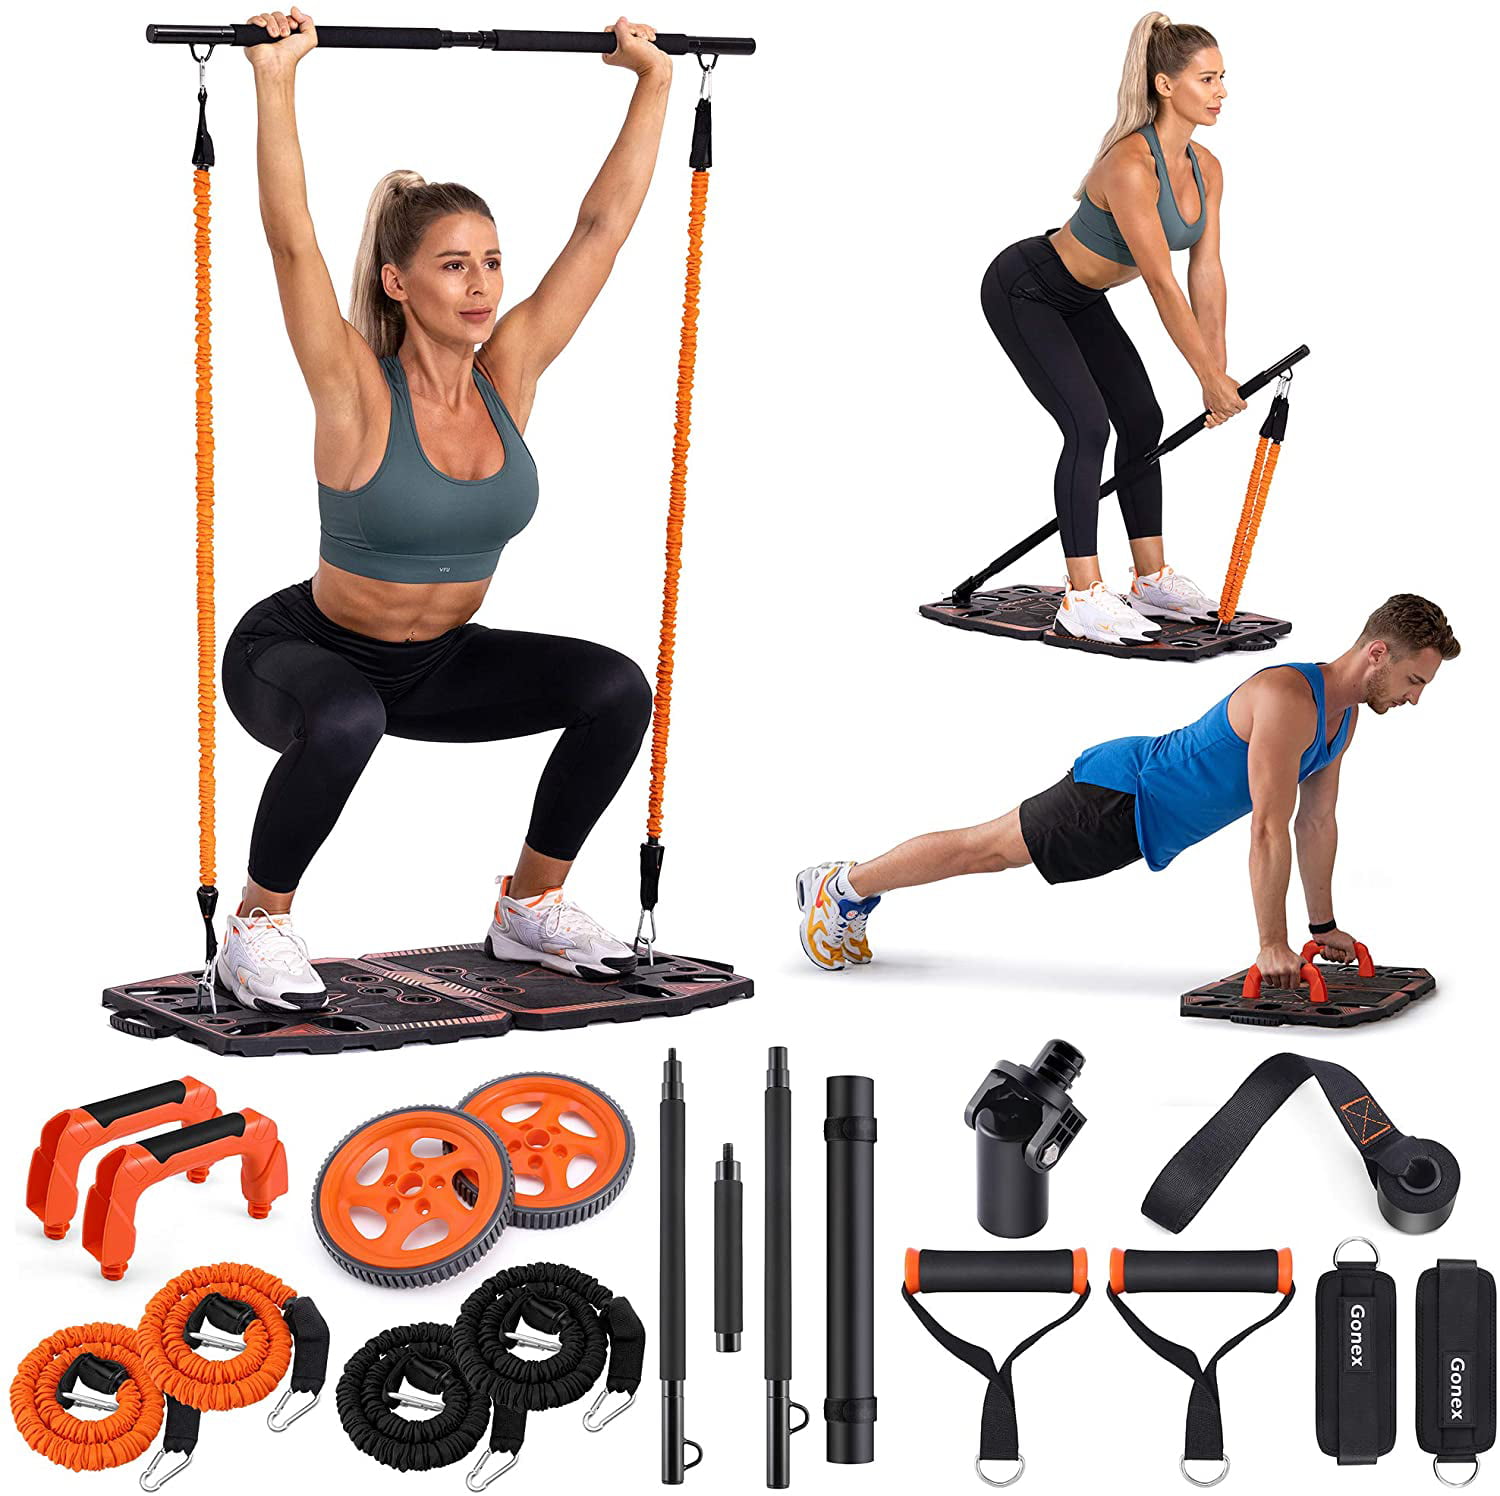 FREE SHIPPING Resistance Fitness Equipment Set Men and Women Fitness Training 